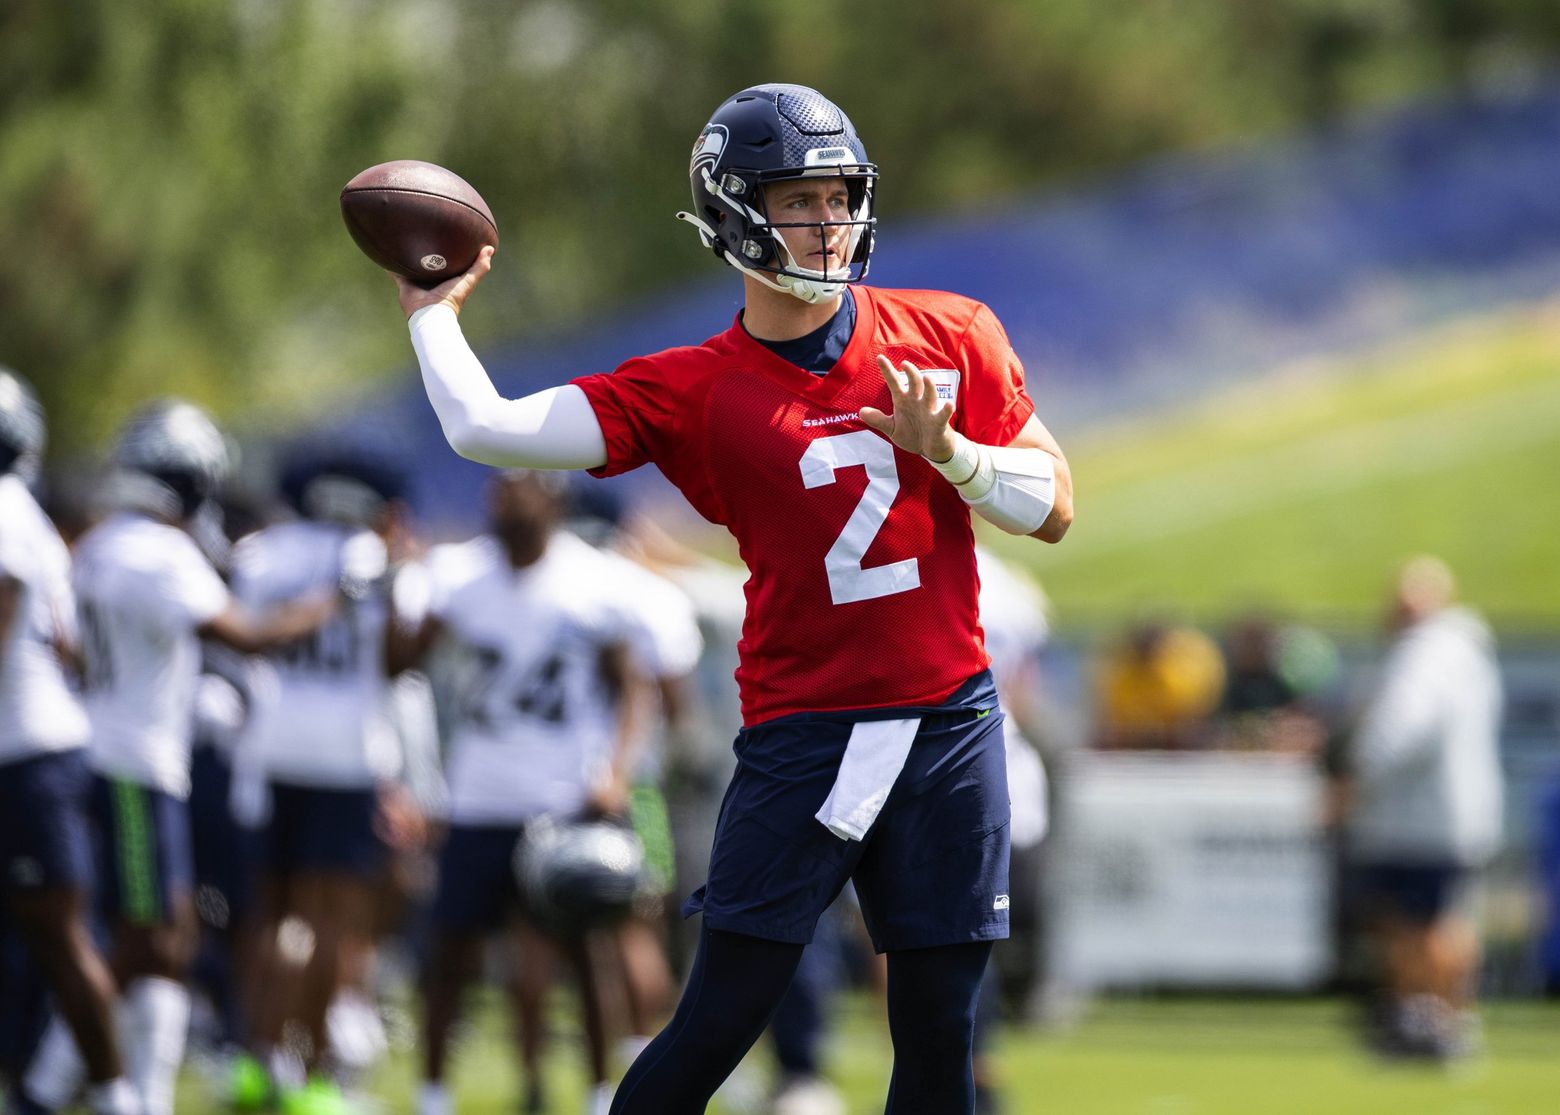 Drew Lock and Noah Fant connect on huge play, in Seahawks uniforms